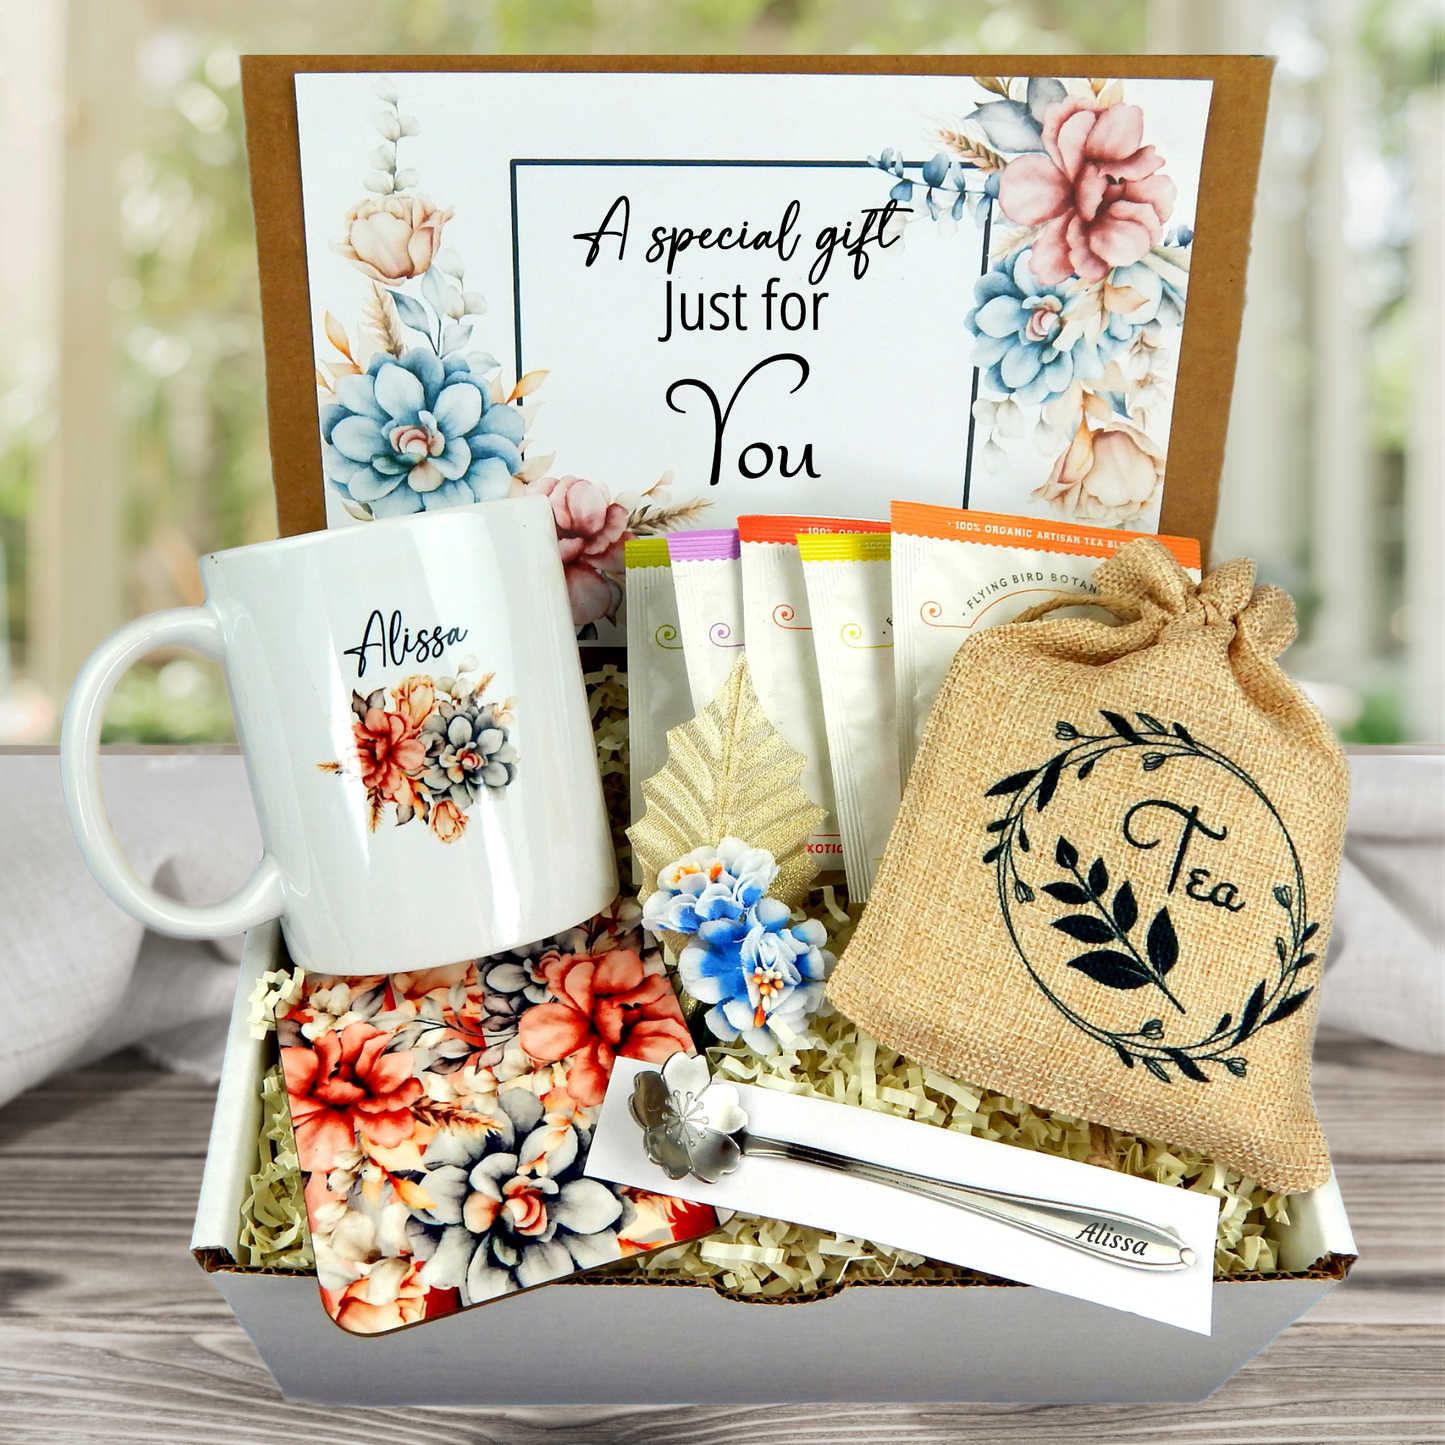 Gorgeous floral print Personalized mug and engraved spoon set accompanied by a large 8-ounce scented candle, an assortment of five artisan teas, and a matching coaster set for women